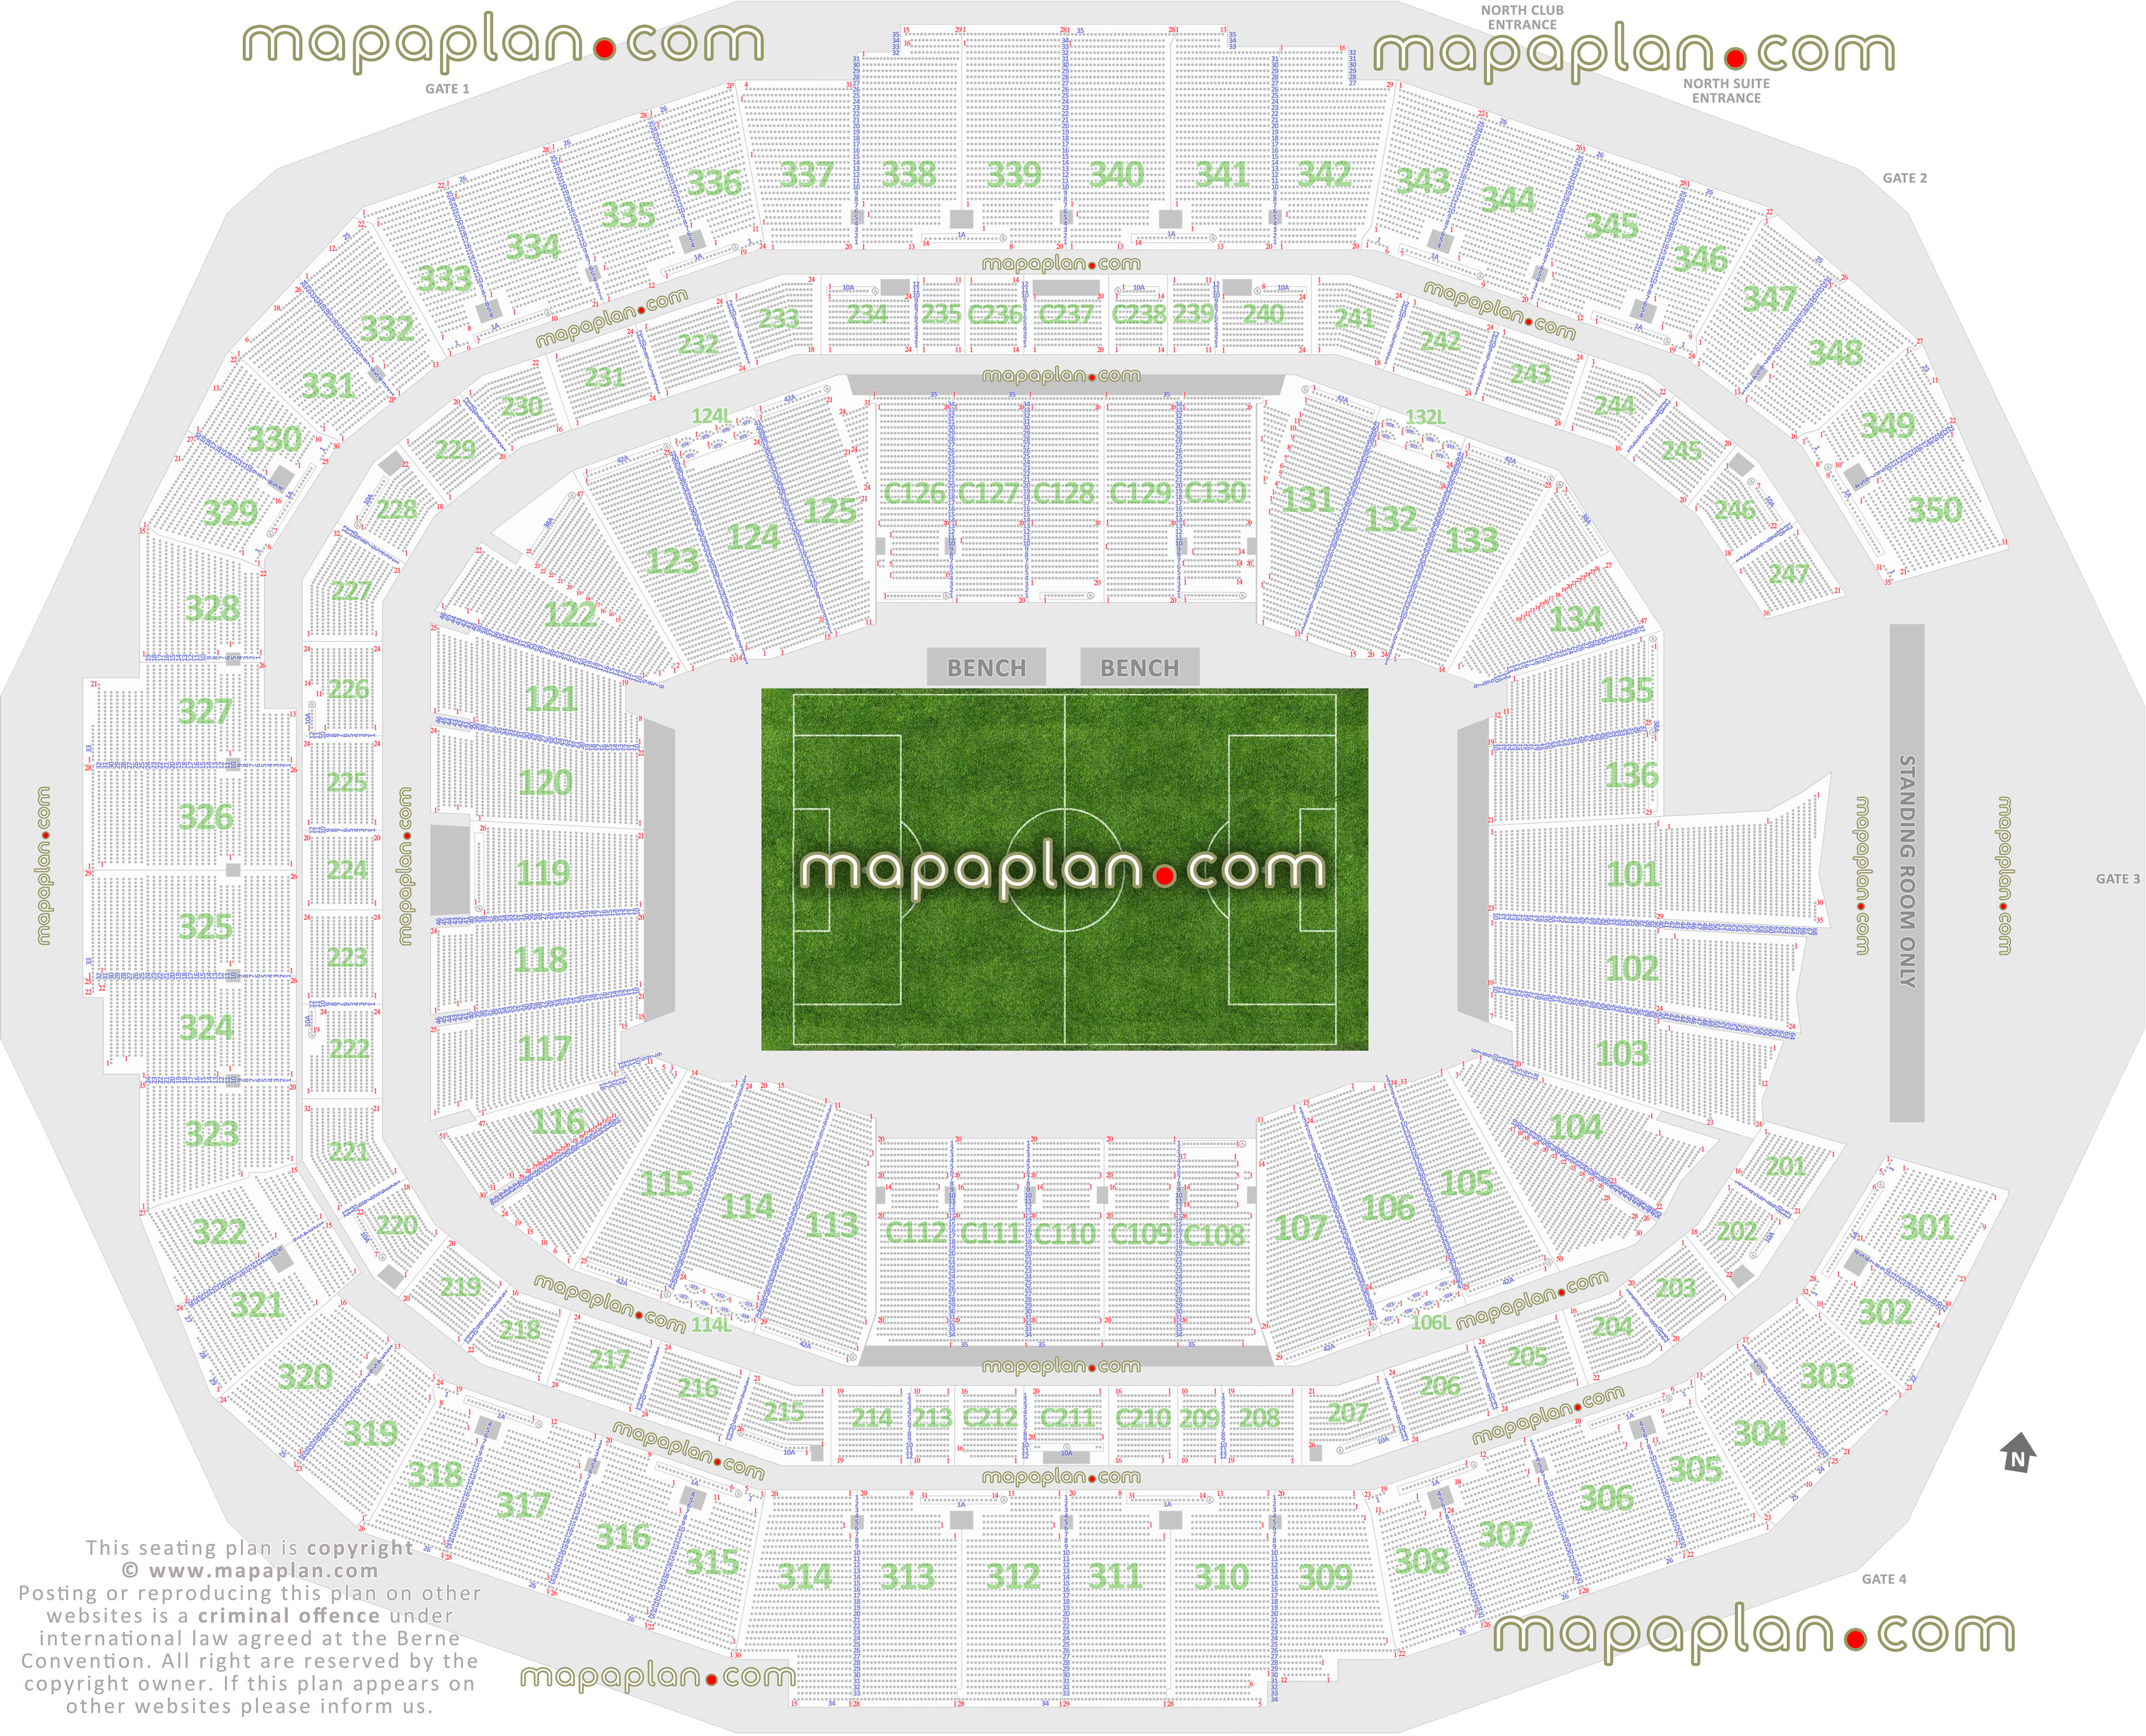 Atlanta Mercedes-Benz Stadium interactive map interactive atlanta united fully seated soccer game find best seats row numbering system seats per row individual find seat locator best interactive seat finder tool precise detailed location data